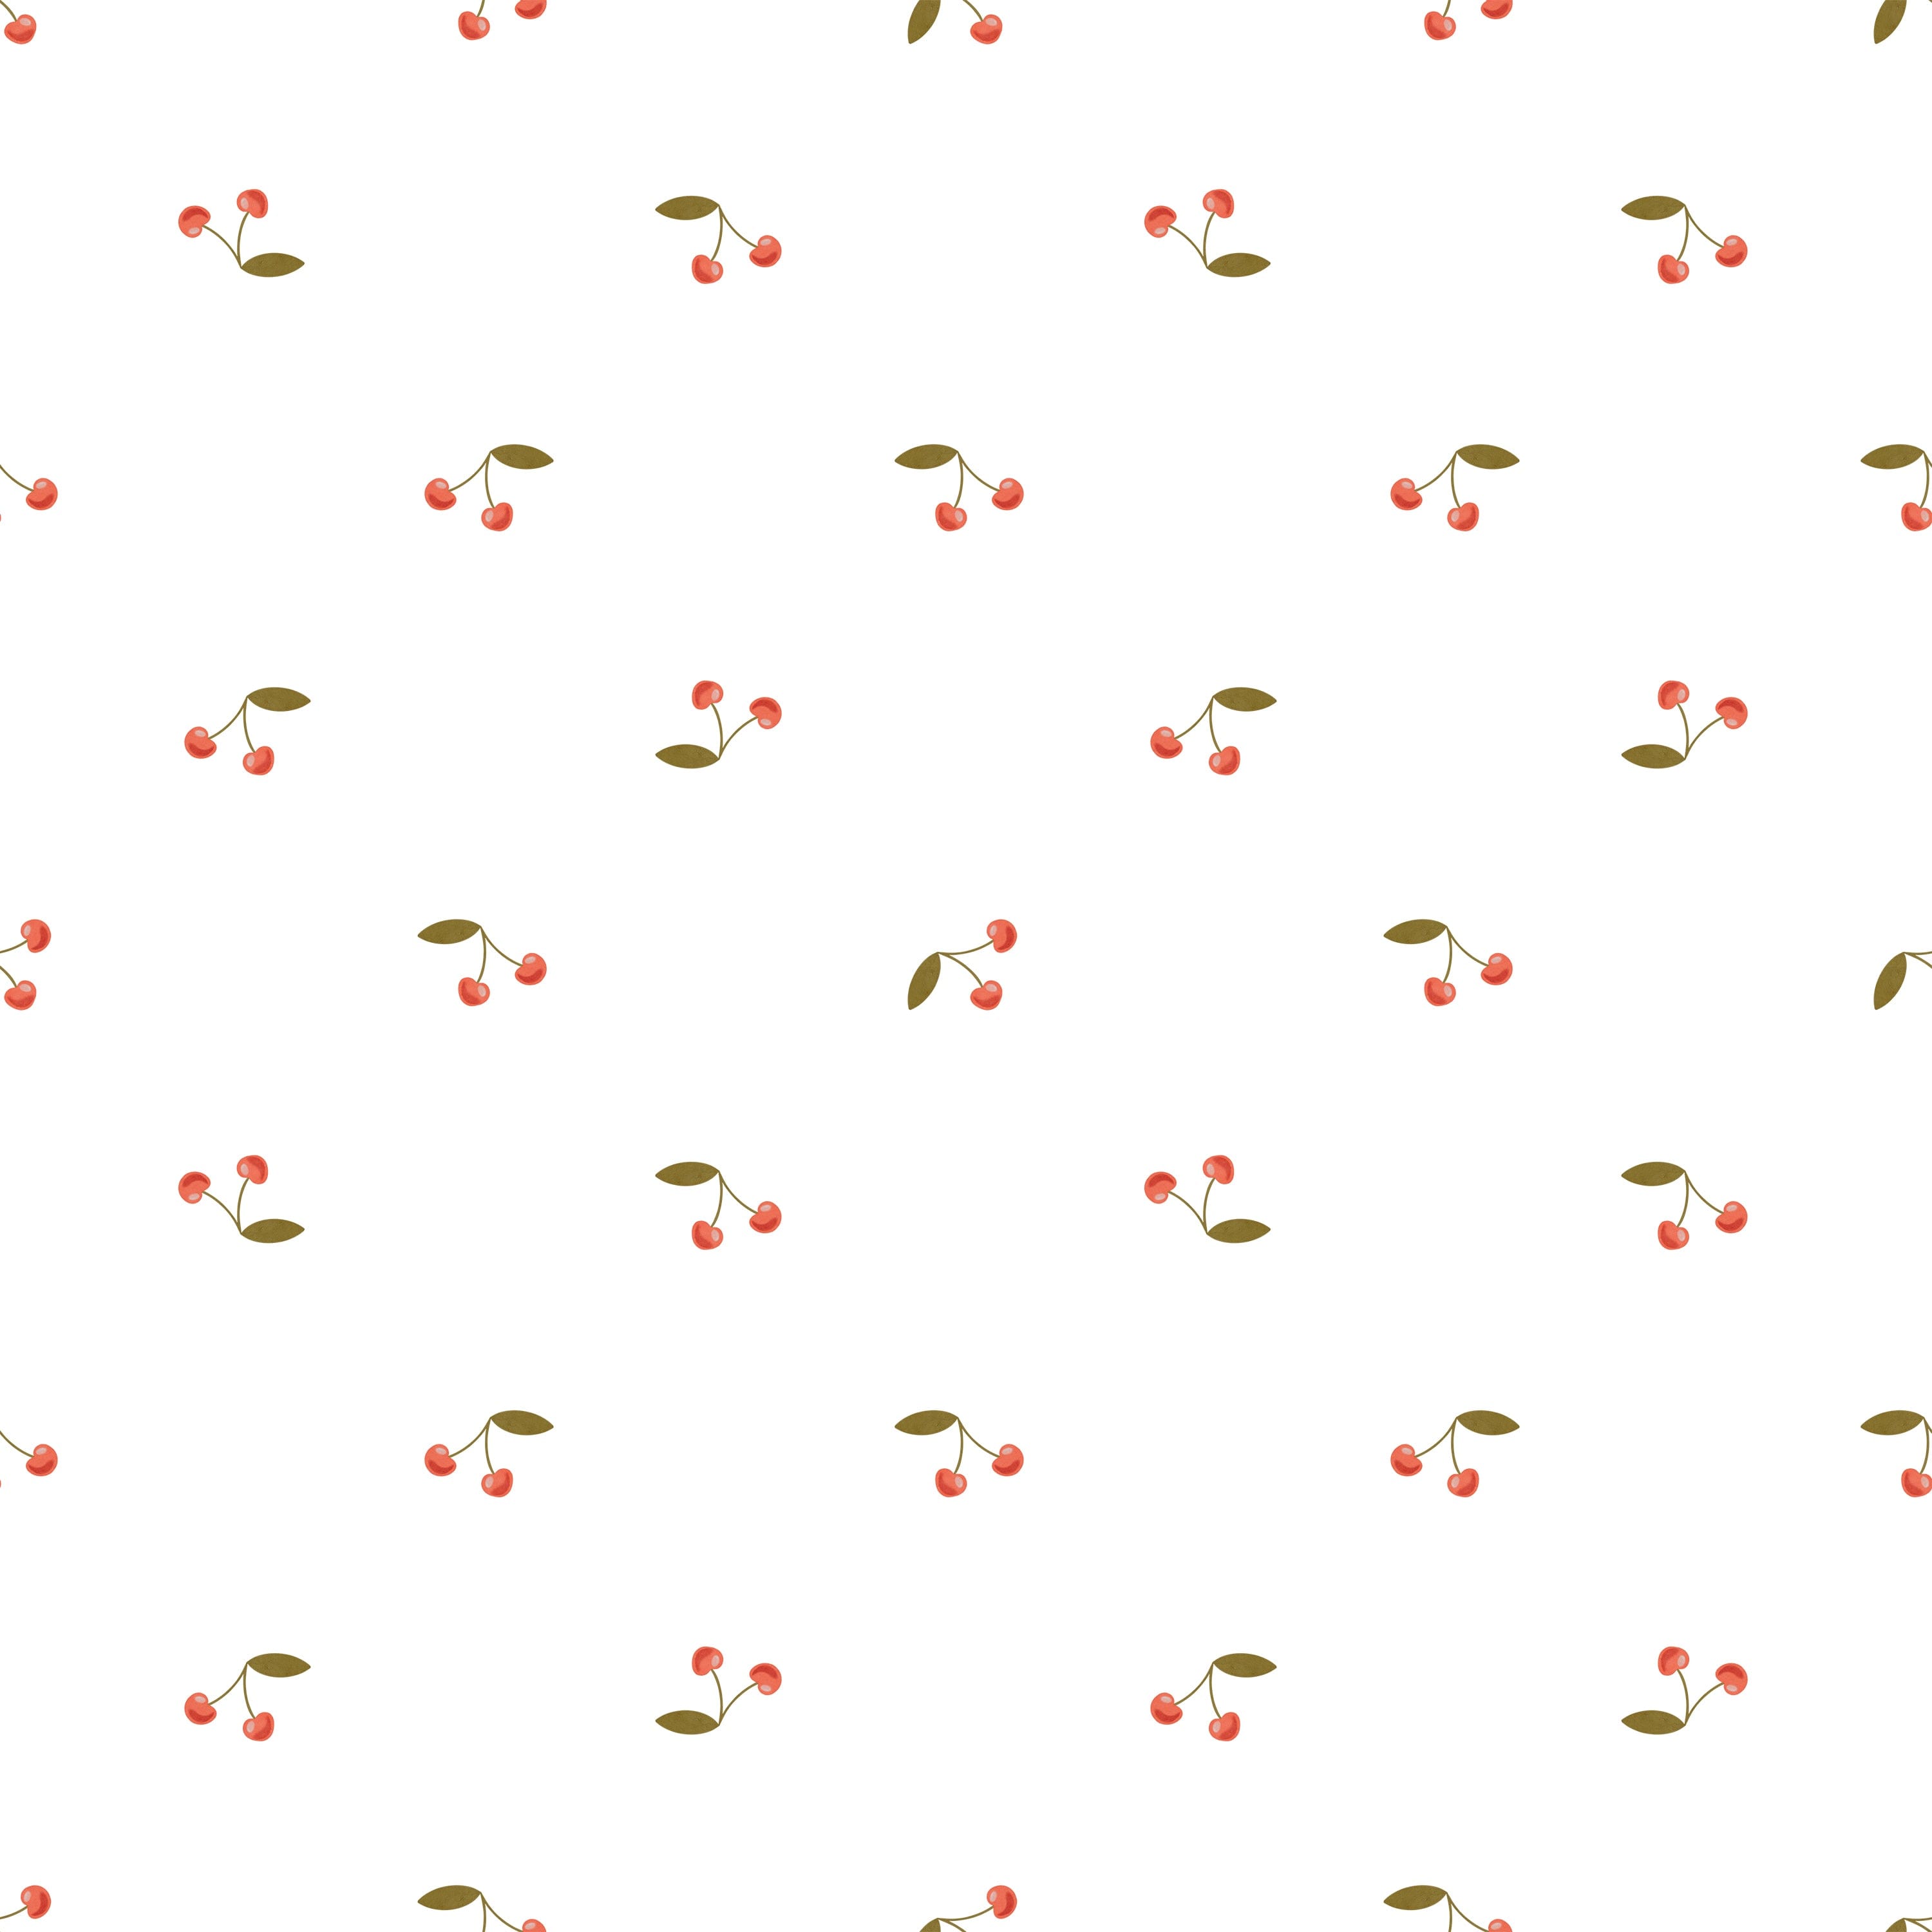 A simple yet charming wallpaper pattern featuring small clusters of red cherries with green leaves spaced evenly over a clean white background, giving a fresh and cheerful look